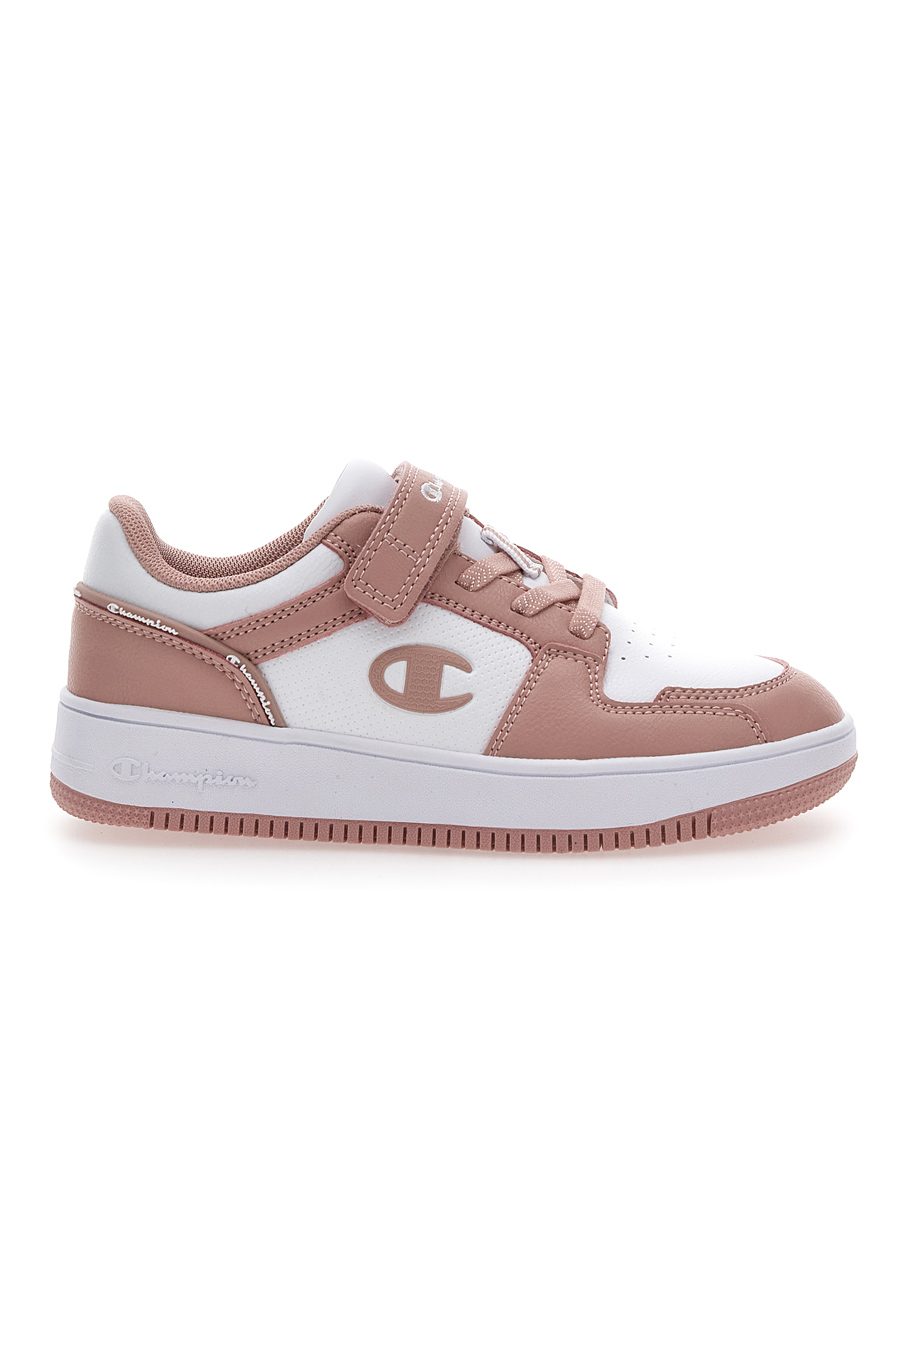 CHAMPION REBOUND 2 LOW G PS SNEAKERS rosa per bambina